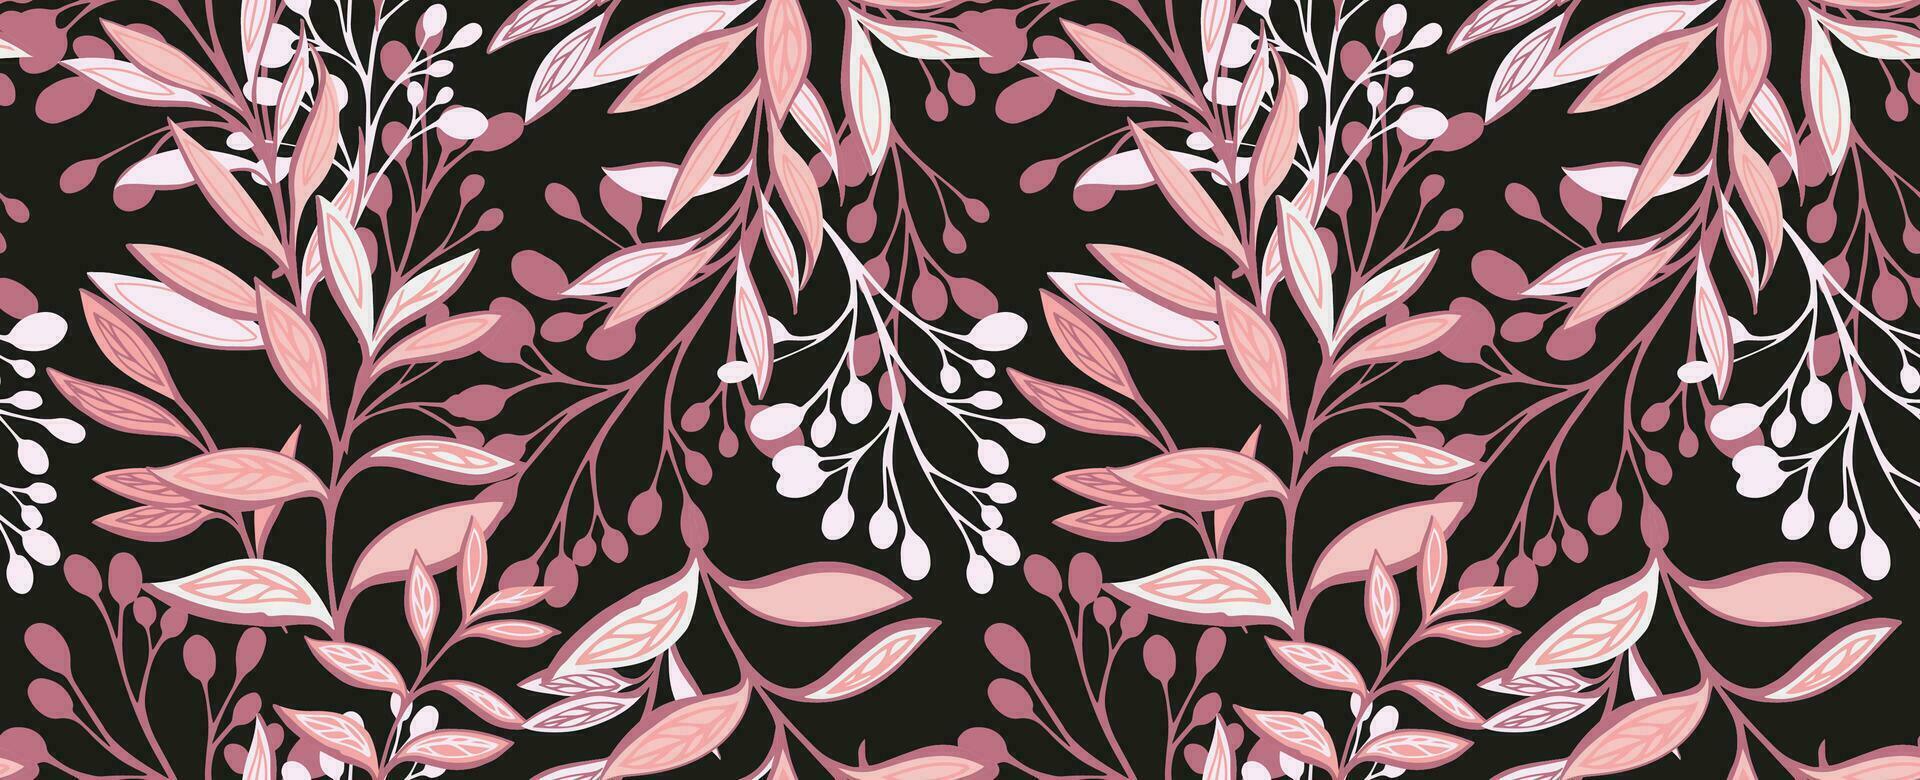 Creative bright tropical botanical plants seamless pattern. Abstract shape leaves branches background. Stylized creative  floral leaf printing. Vector hand drawn. Design for fashion, fabric, textiles